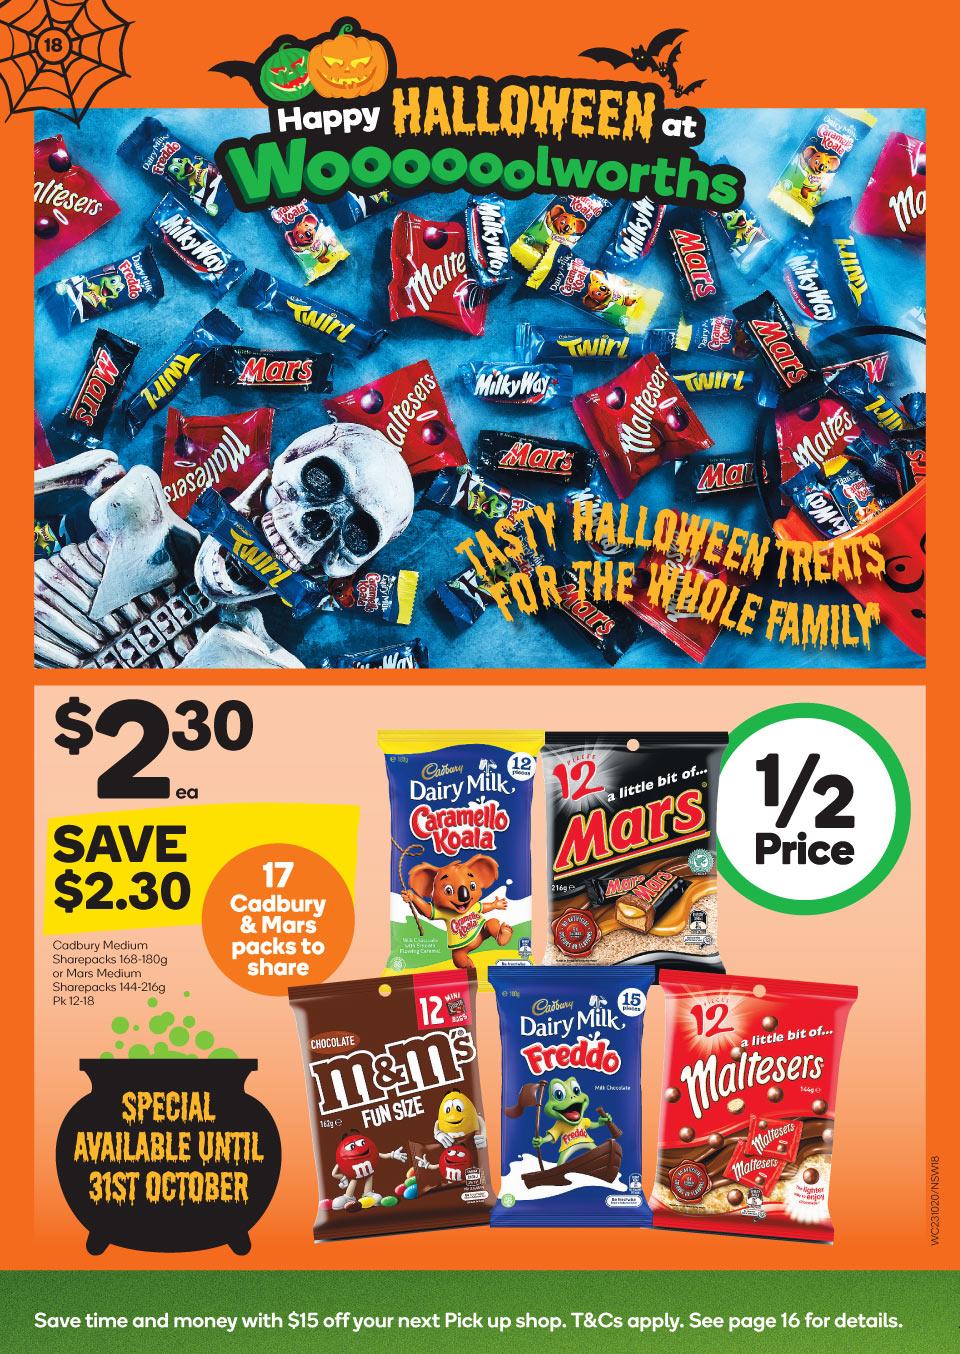 Woolworths Halloween Products 23 - 29 Oct 2019